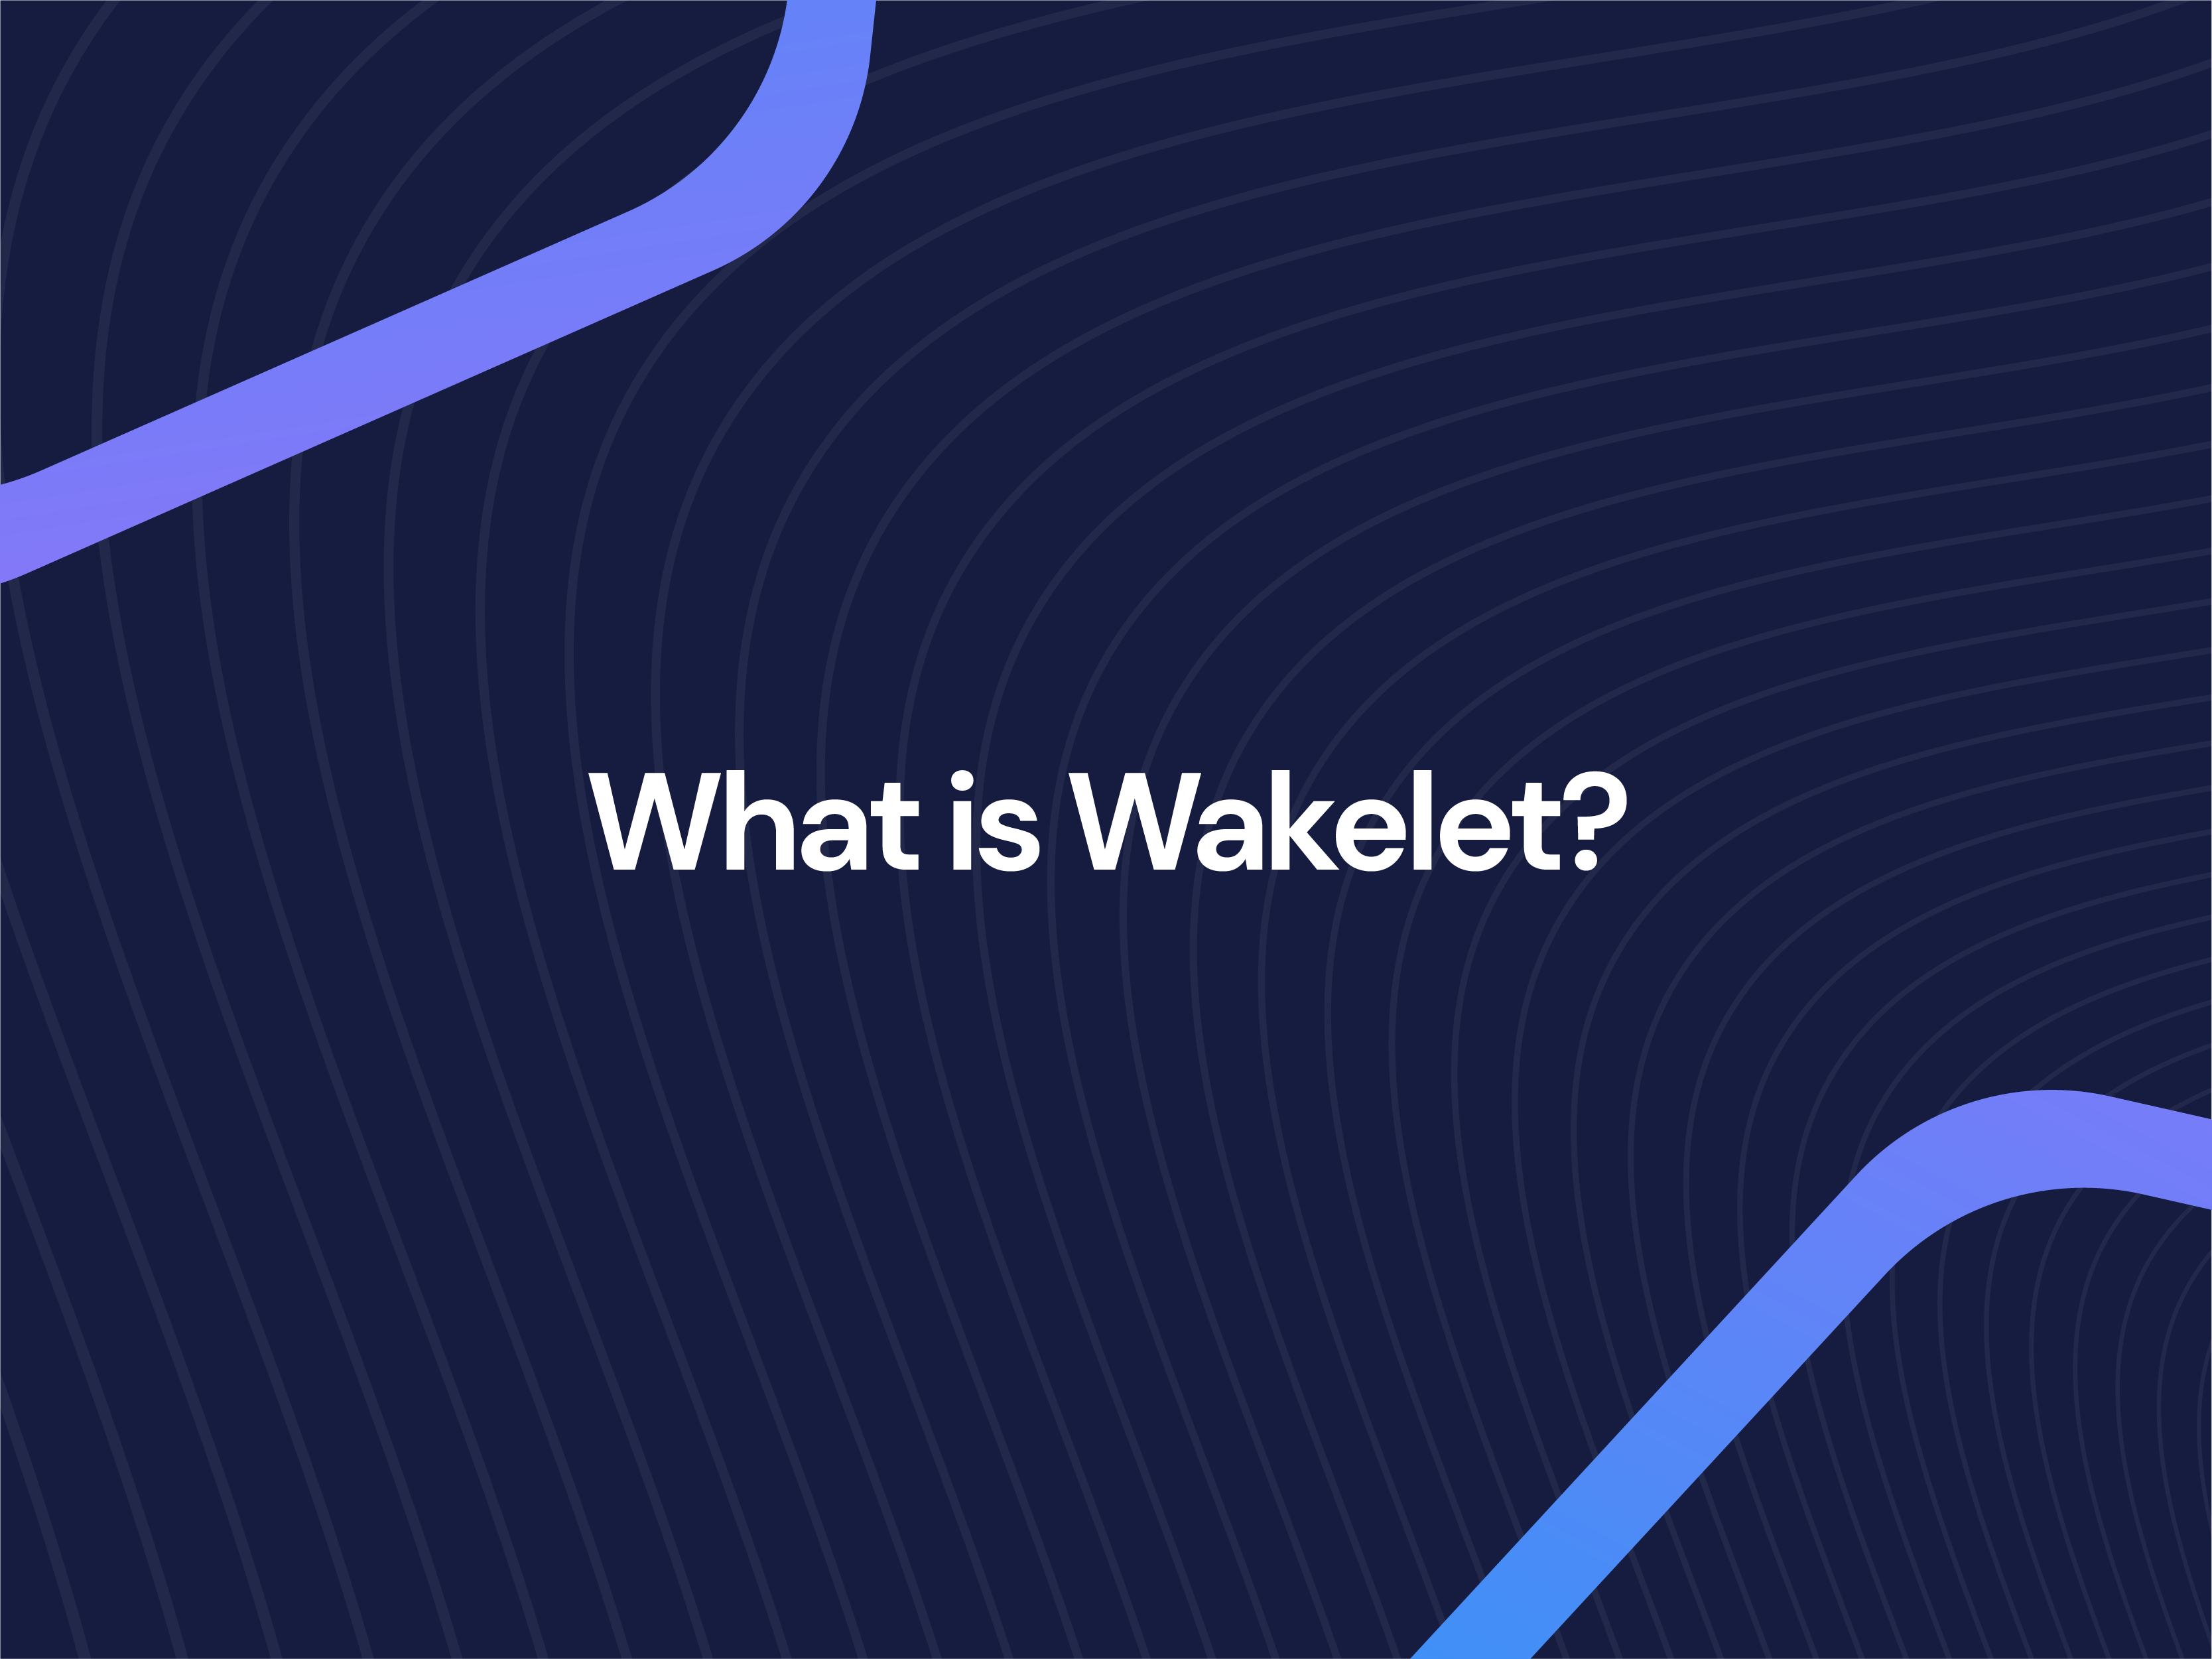 1. What is Wakelet?